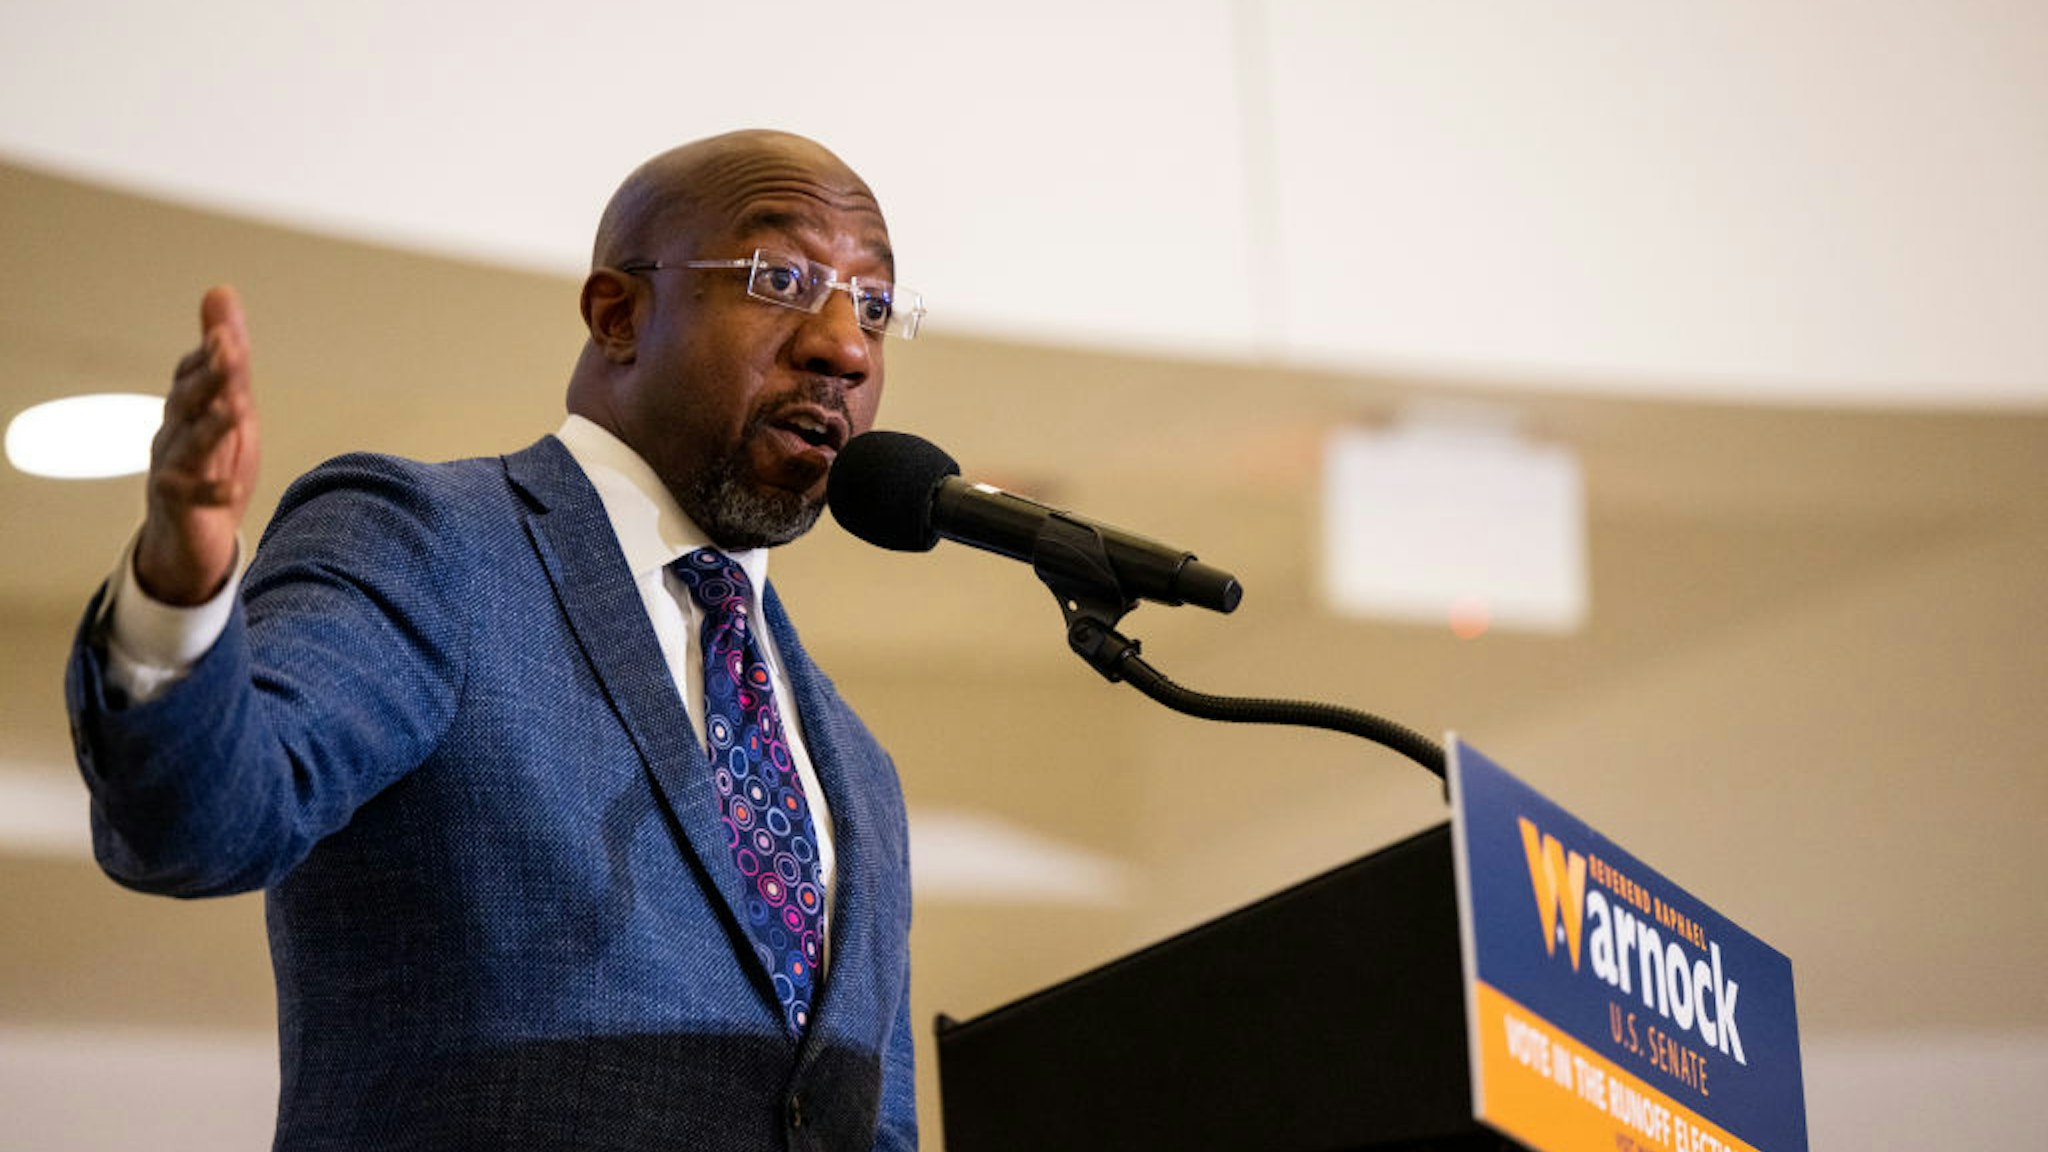 MACON, GEORGIA - NOVEMBER 17: U.S. Sen. Raphael Warnock (D-GA) speaks at a campaign rally at the Tubman Museum on November 17, 2022 in Macon, Georgia. Warnock faces Republican challenger Herschel Walker in a runoff election December 6. (Photo by Brandon Bell/Getty Images)